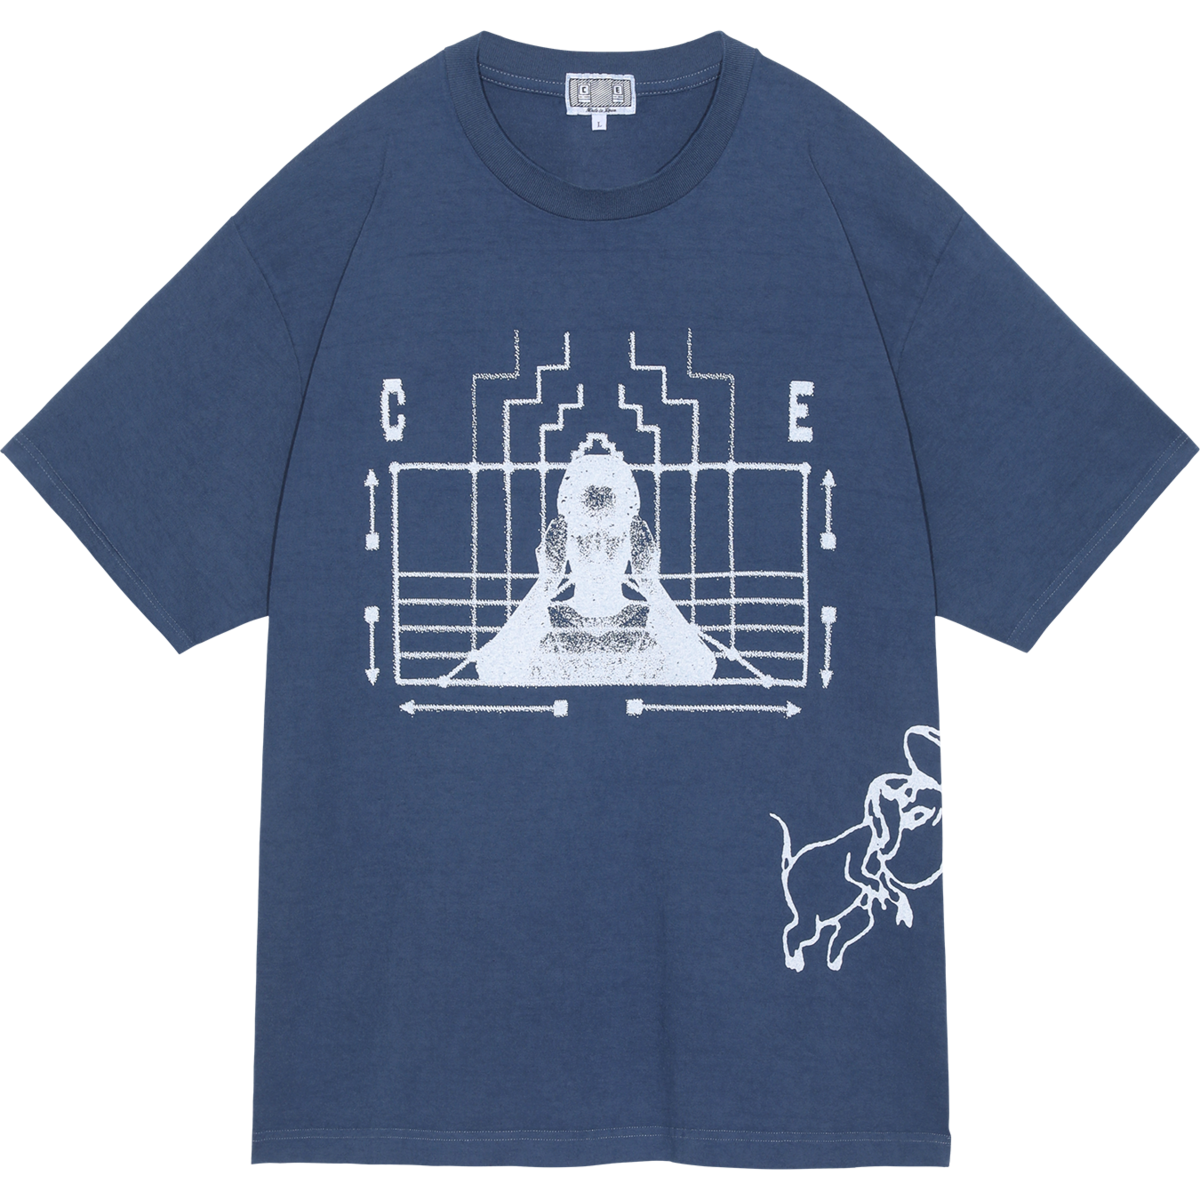 OVERDYE CAUSE AND EFFECT T｜NAVY